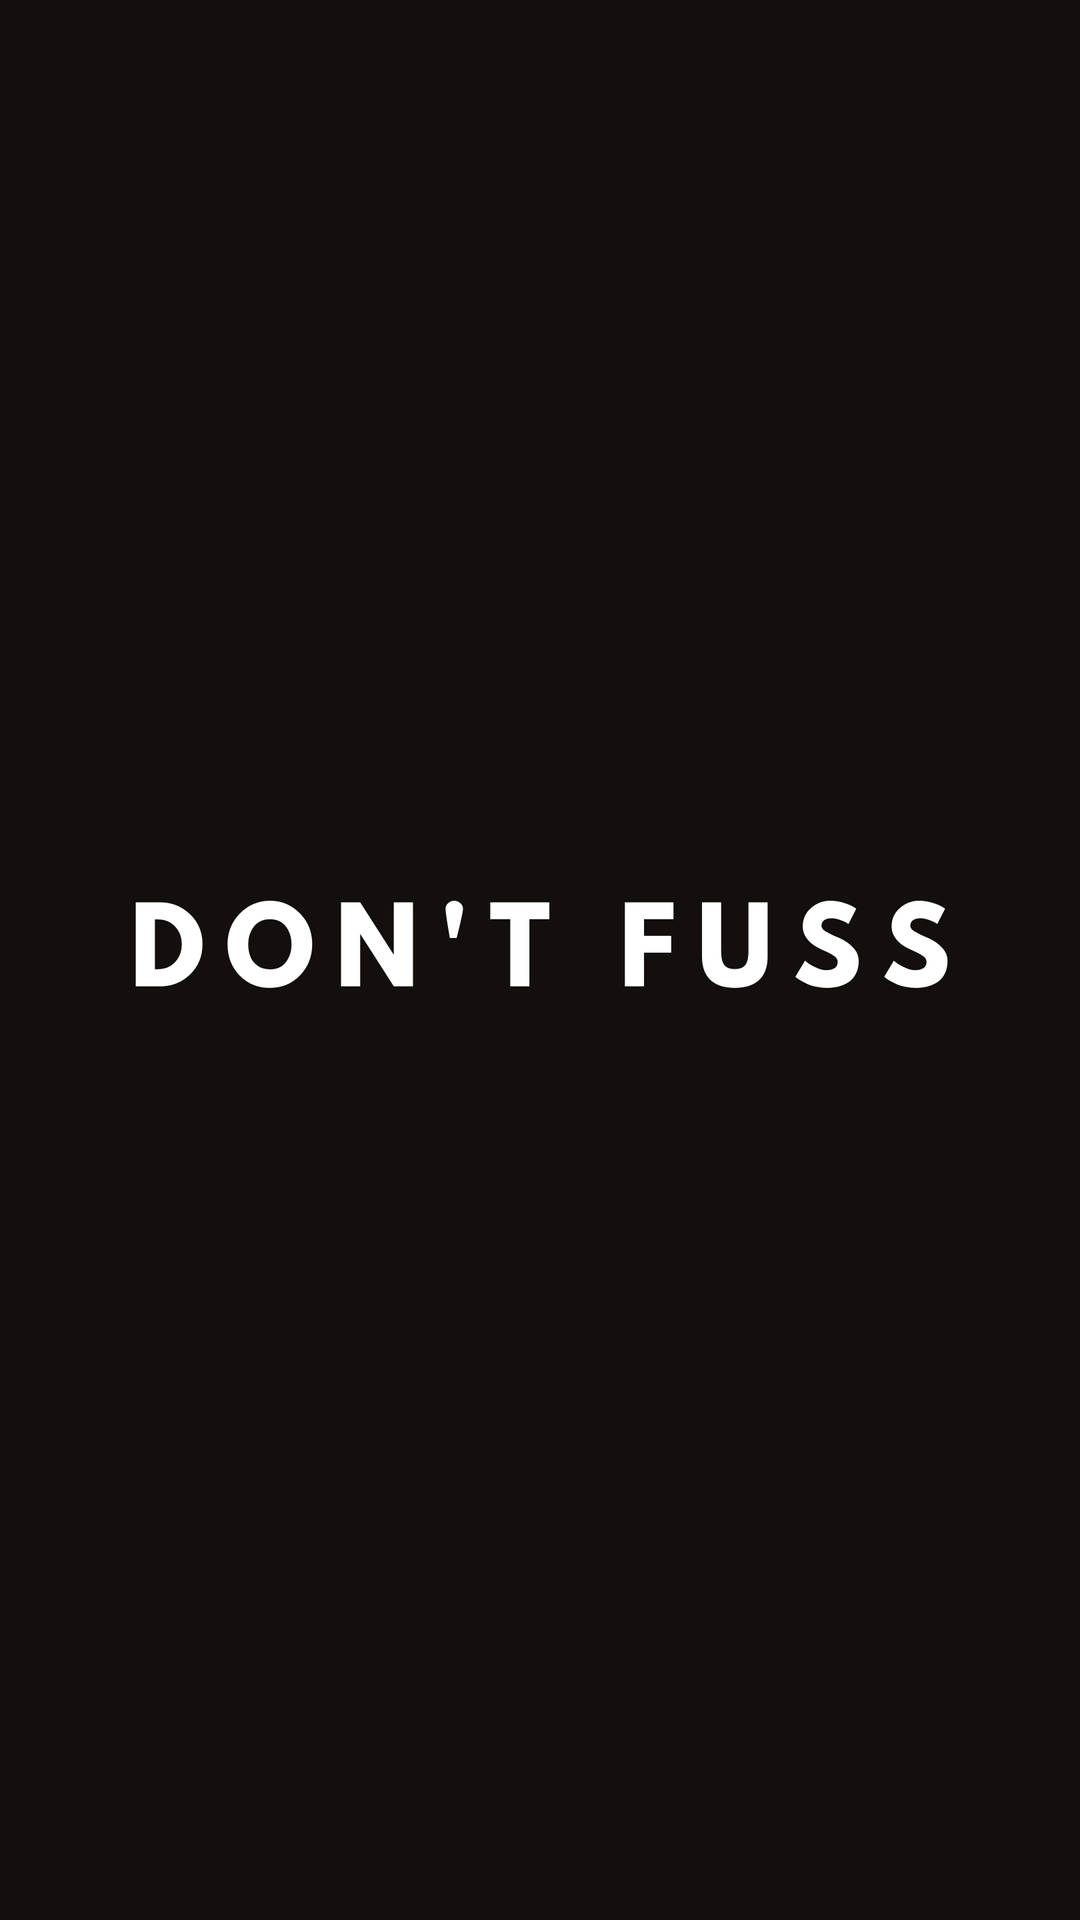 Don't Fuss Inspirational Quote